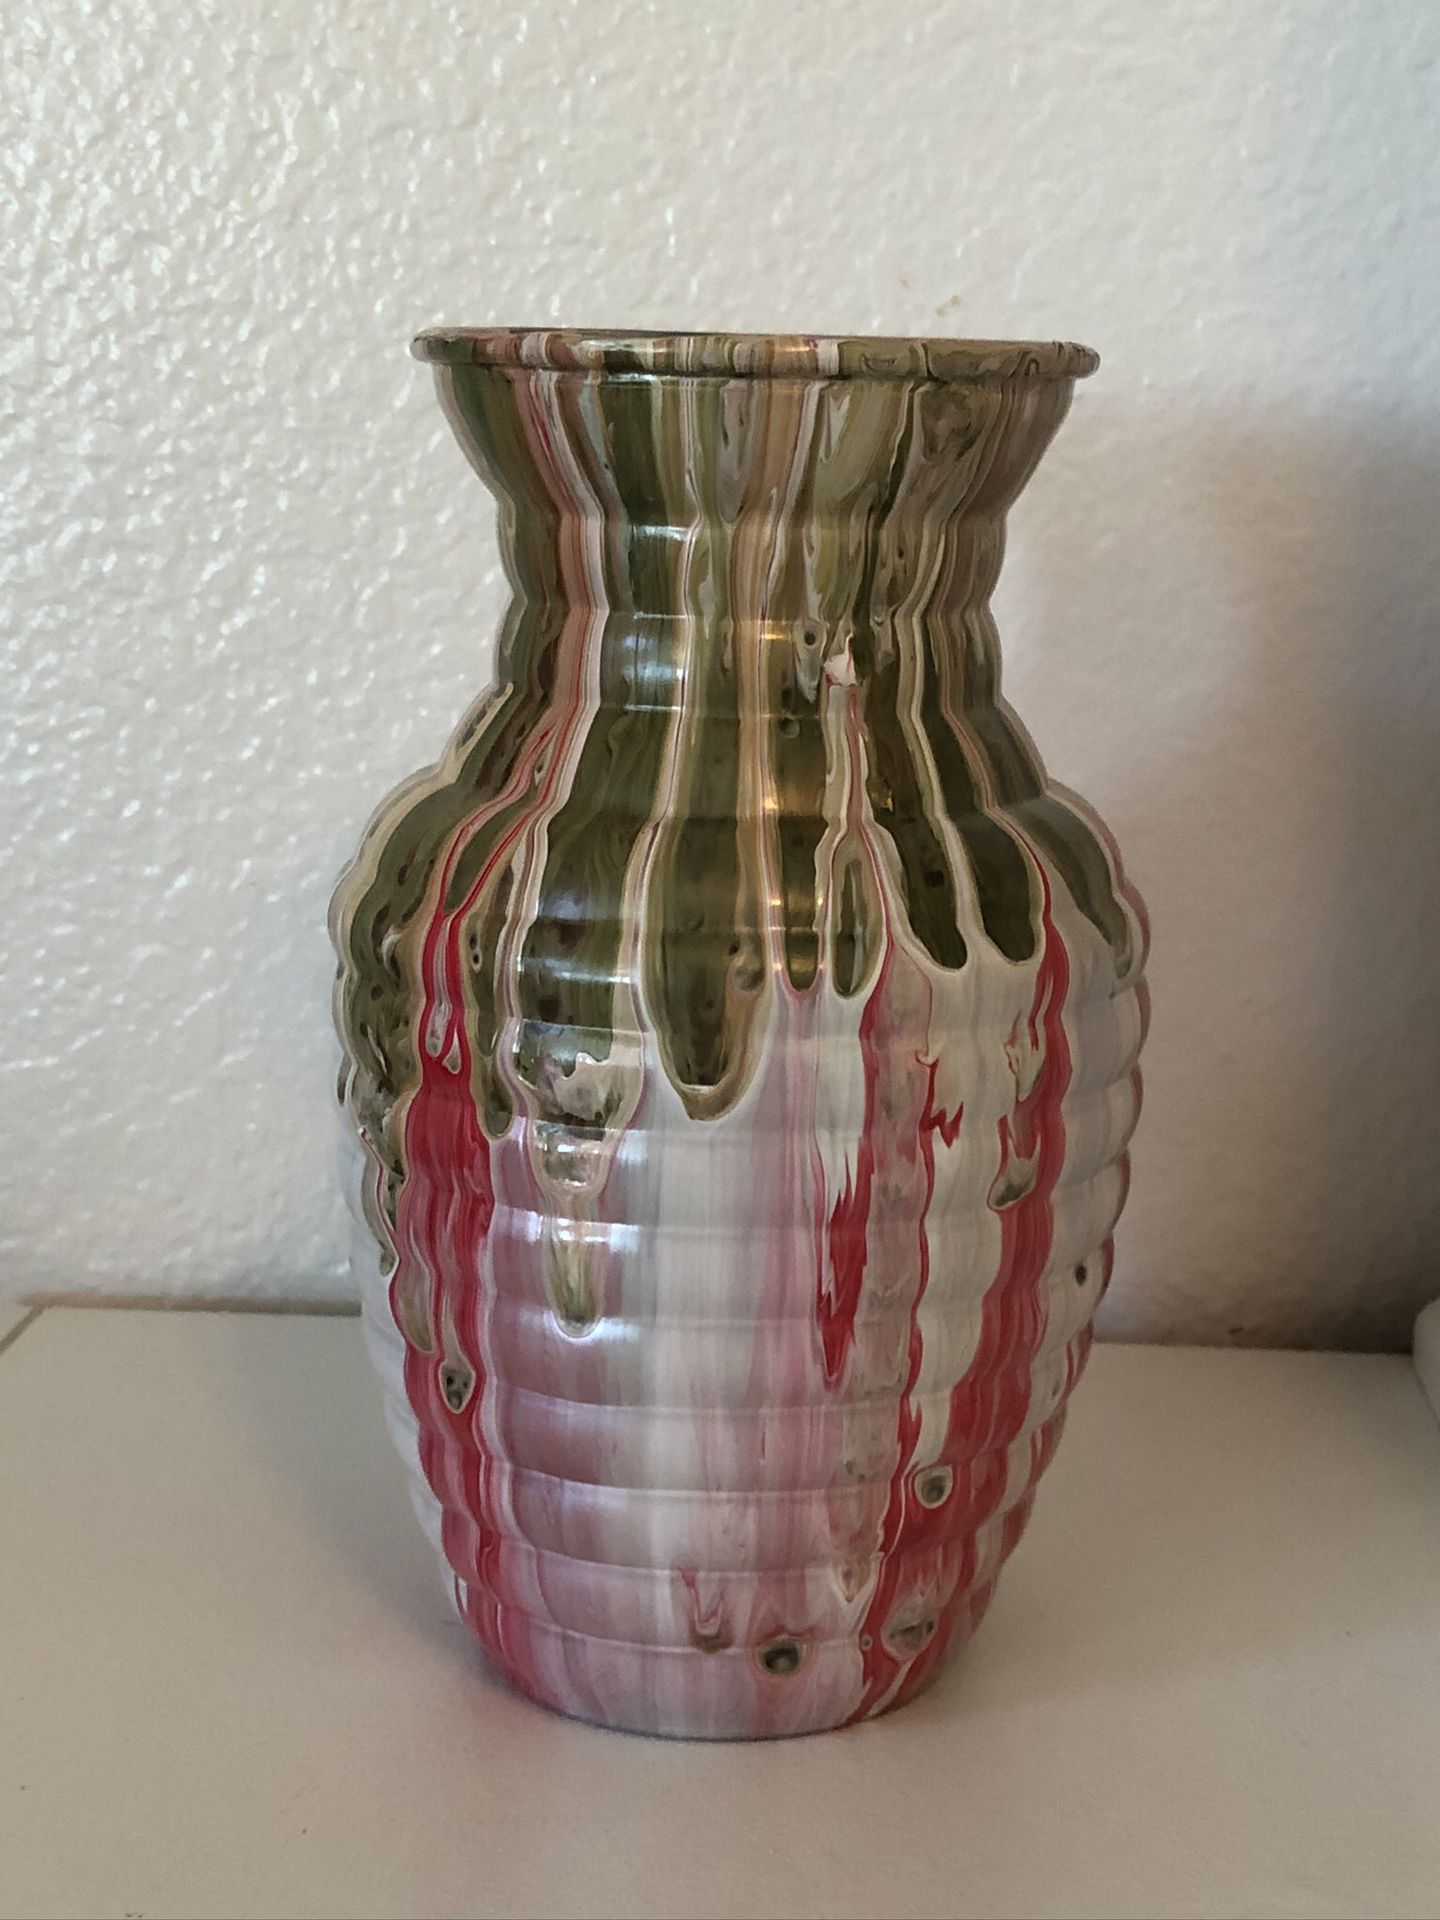 New Glass Acrylic Painted Vase: 8” Tall